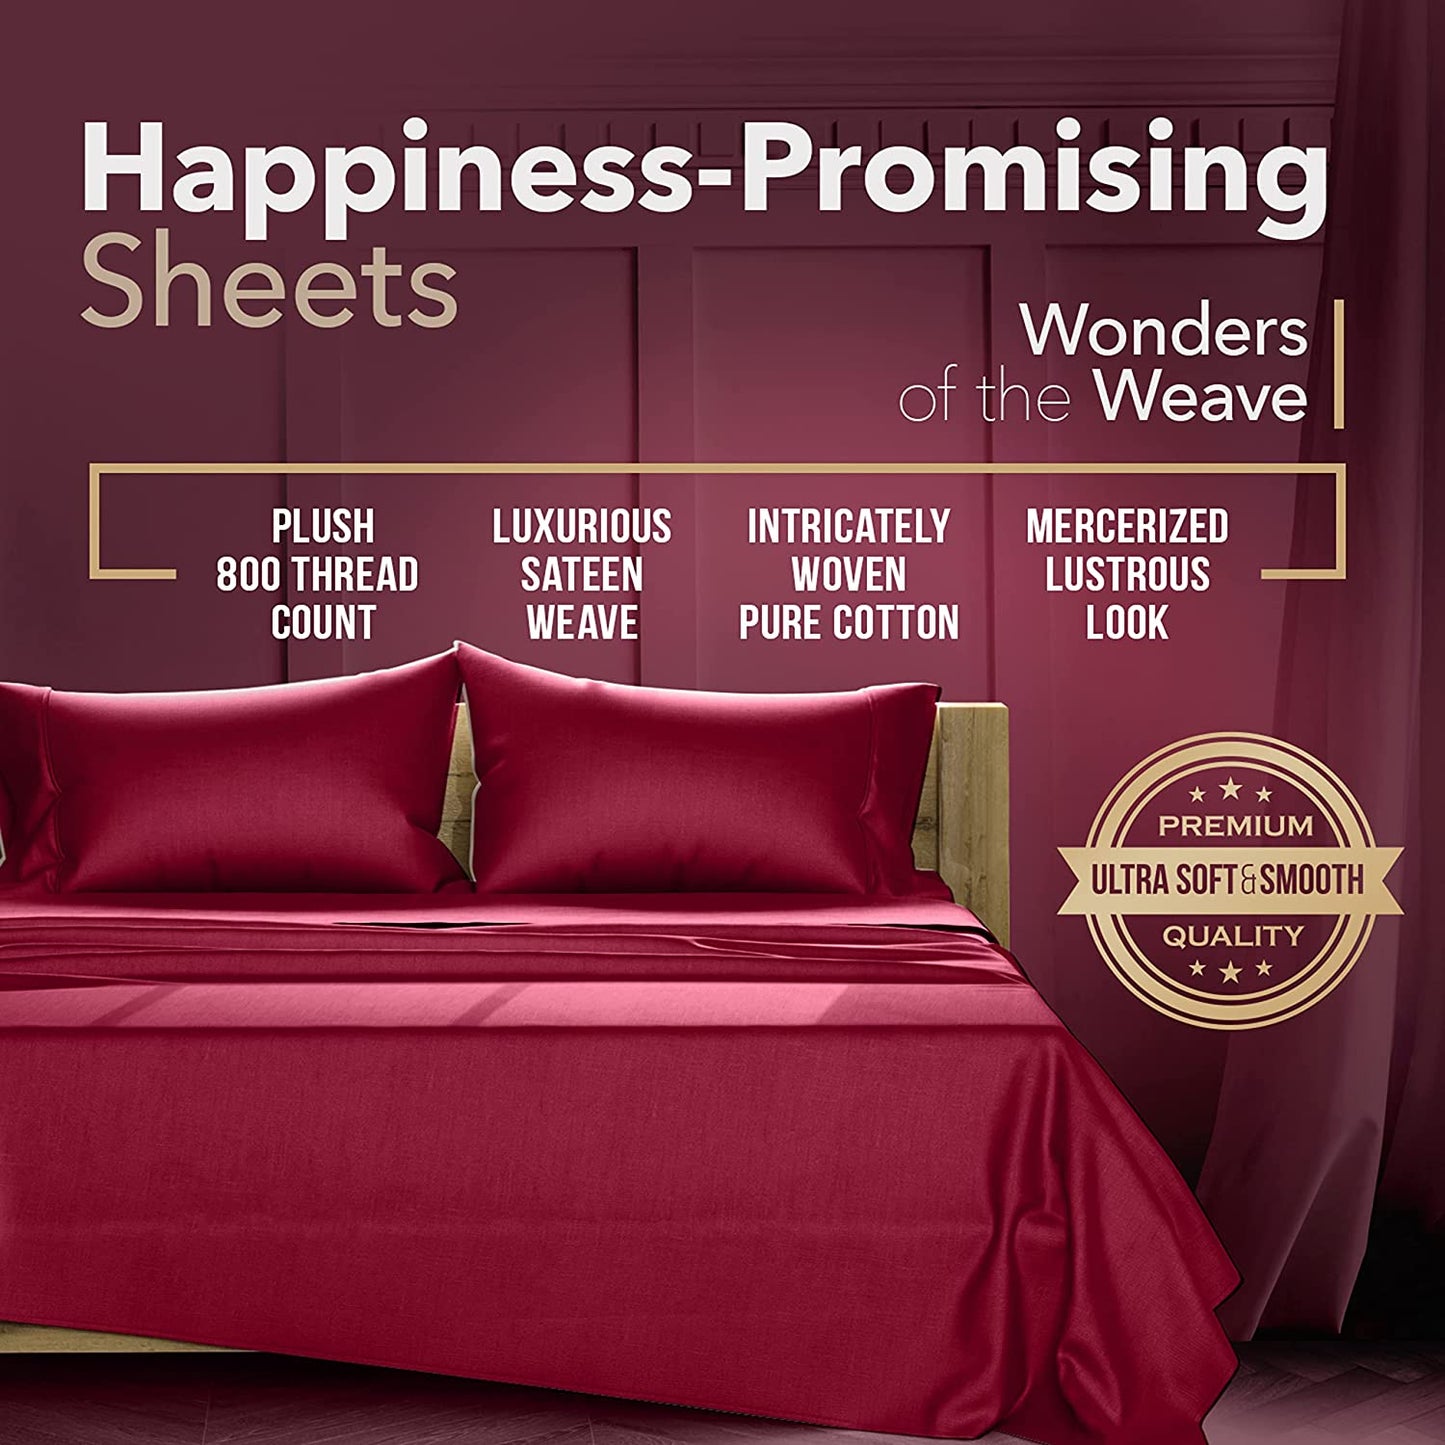 Egyptian Cotton Sheet Set - 800 TC 4 PC Burgundy Queen Bedsheet for Queen Size Bed, Sateen Weave Luxury Hotel Sheets, Soft Cooling Bed Sheet, 16" Deep Pocket (Fits Up to 18" Mattress)